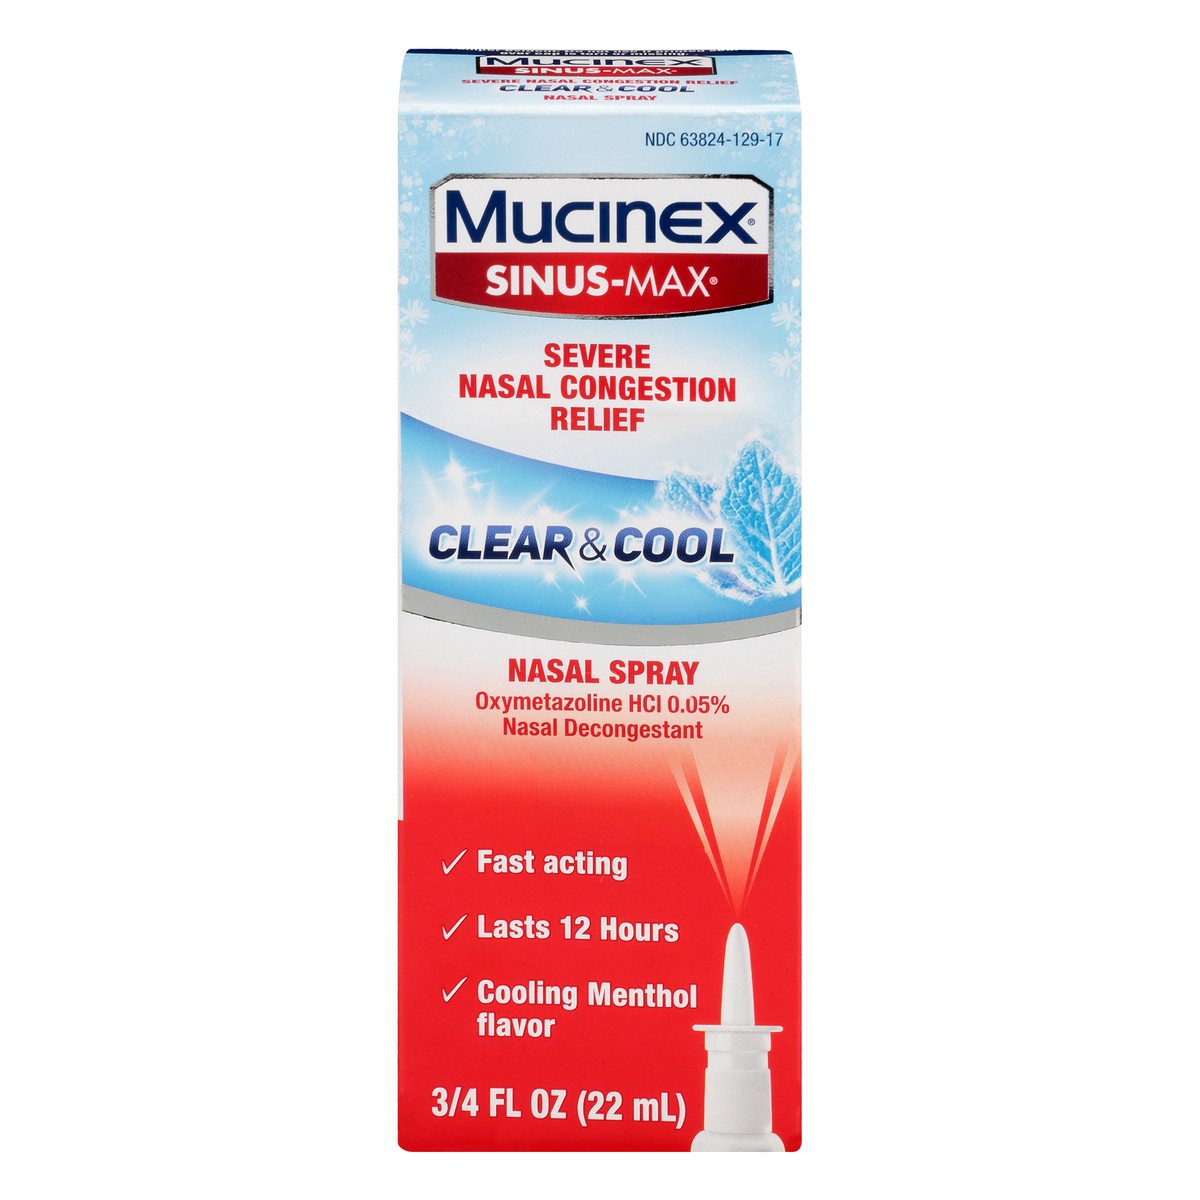 slide 1 of 9, Mucinex Sinus-Max Severe Nasal Congestion Relief Clear & Cool Nasal Spray, 0.75 fl. oz., Lasts 12 Hours, Fast Acting, Cooling Menthol Flavor, 0.75 fl oz